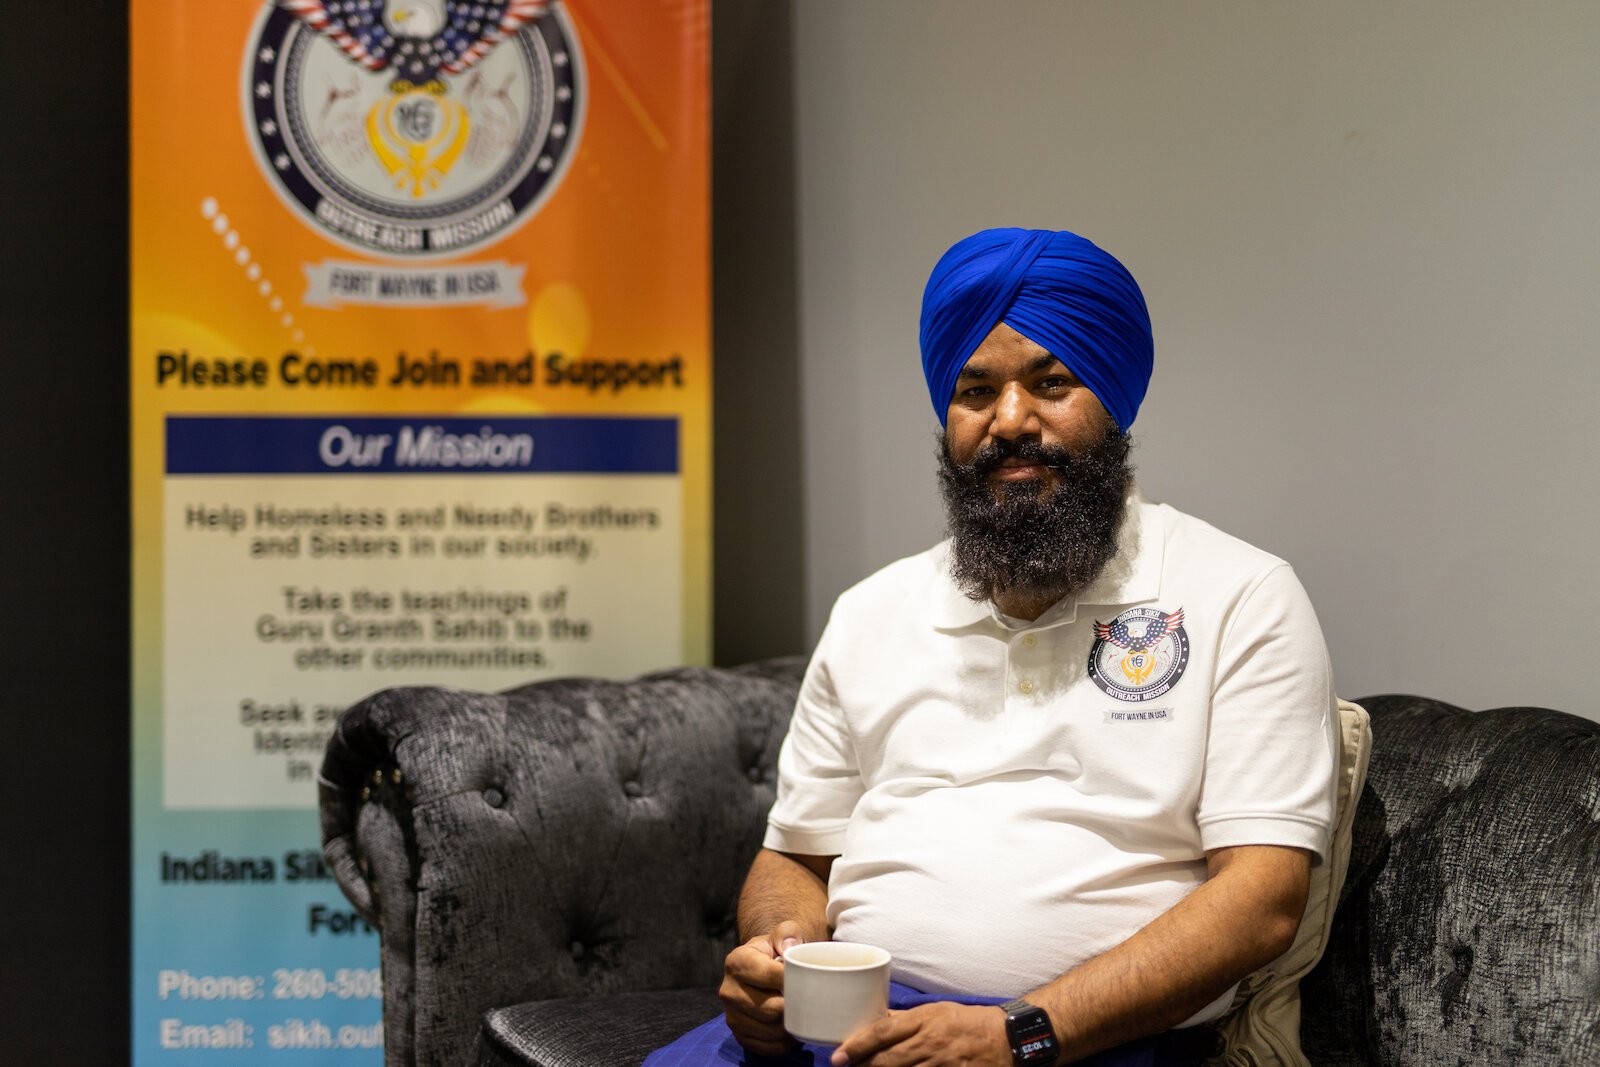 Jesse Singh is Founder of the Indiana Sikh Outreach Mission.